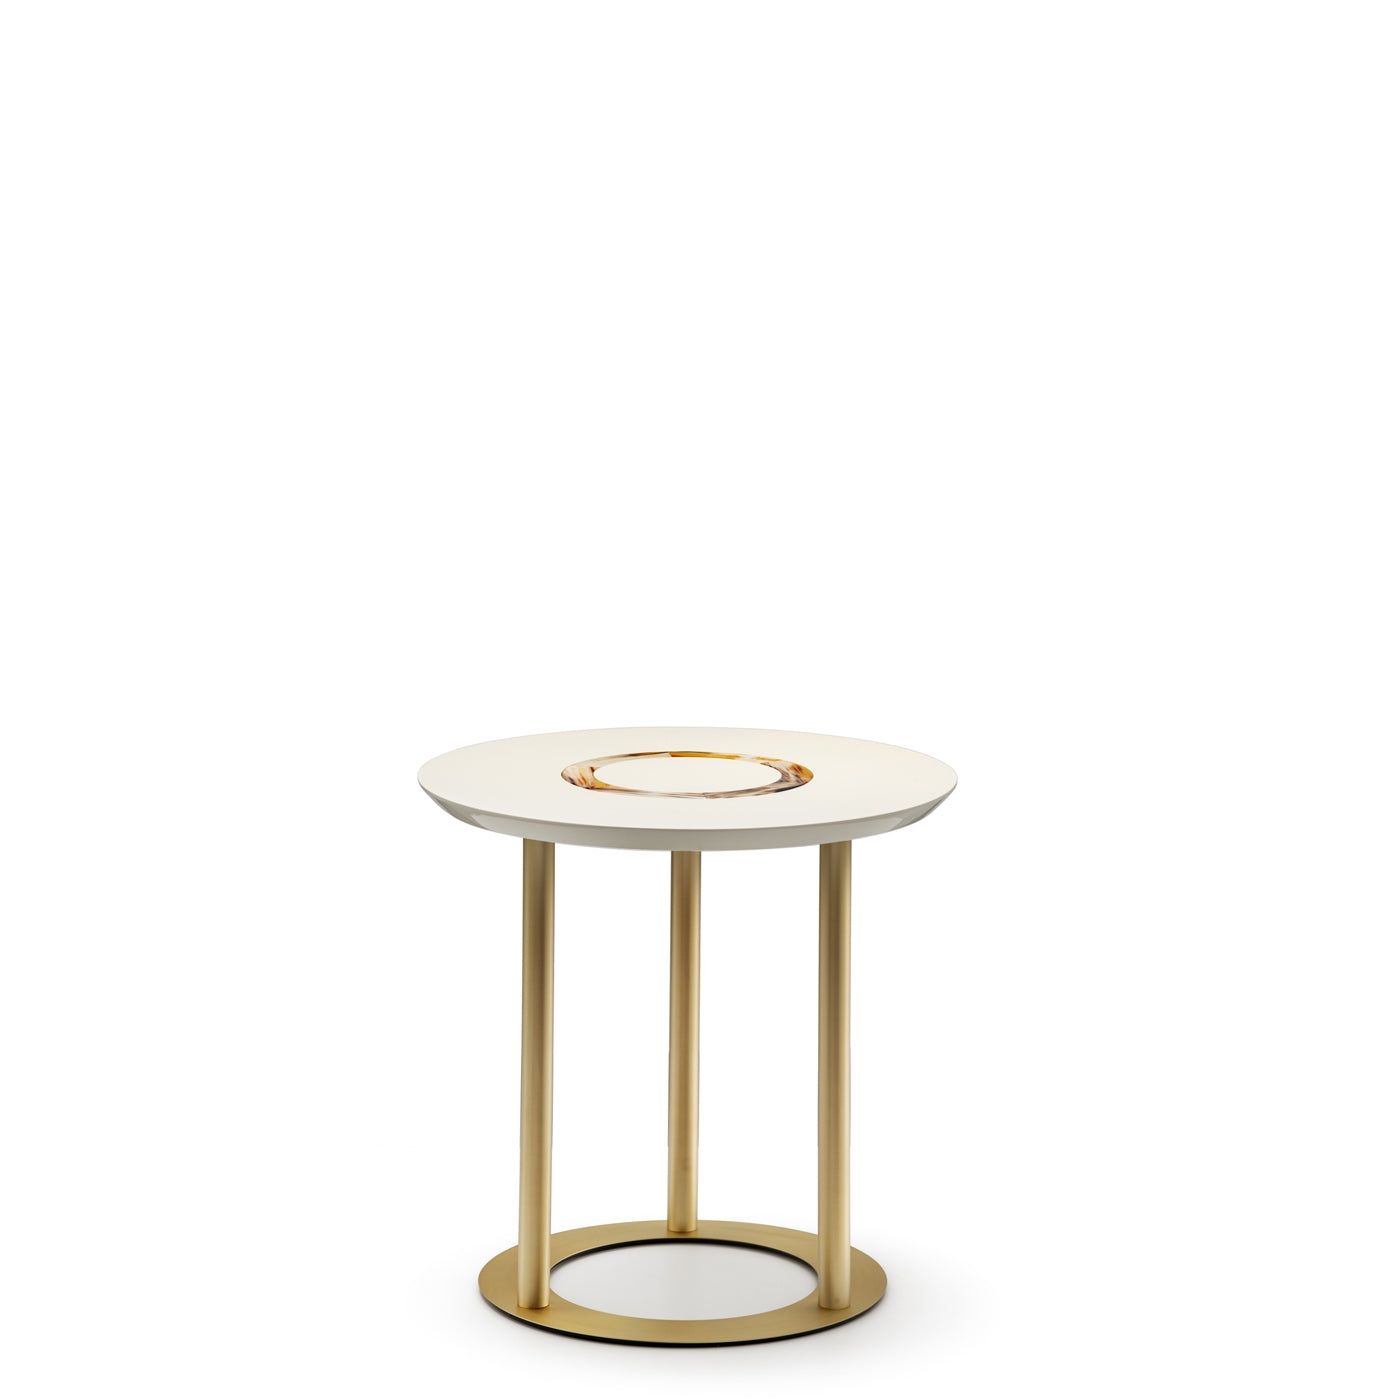 SIDE TABLE SATURNO